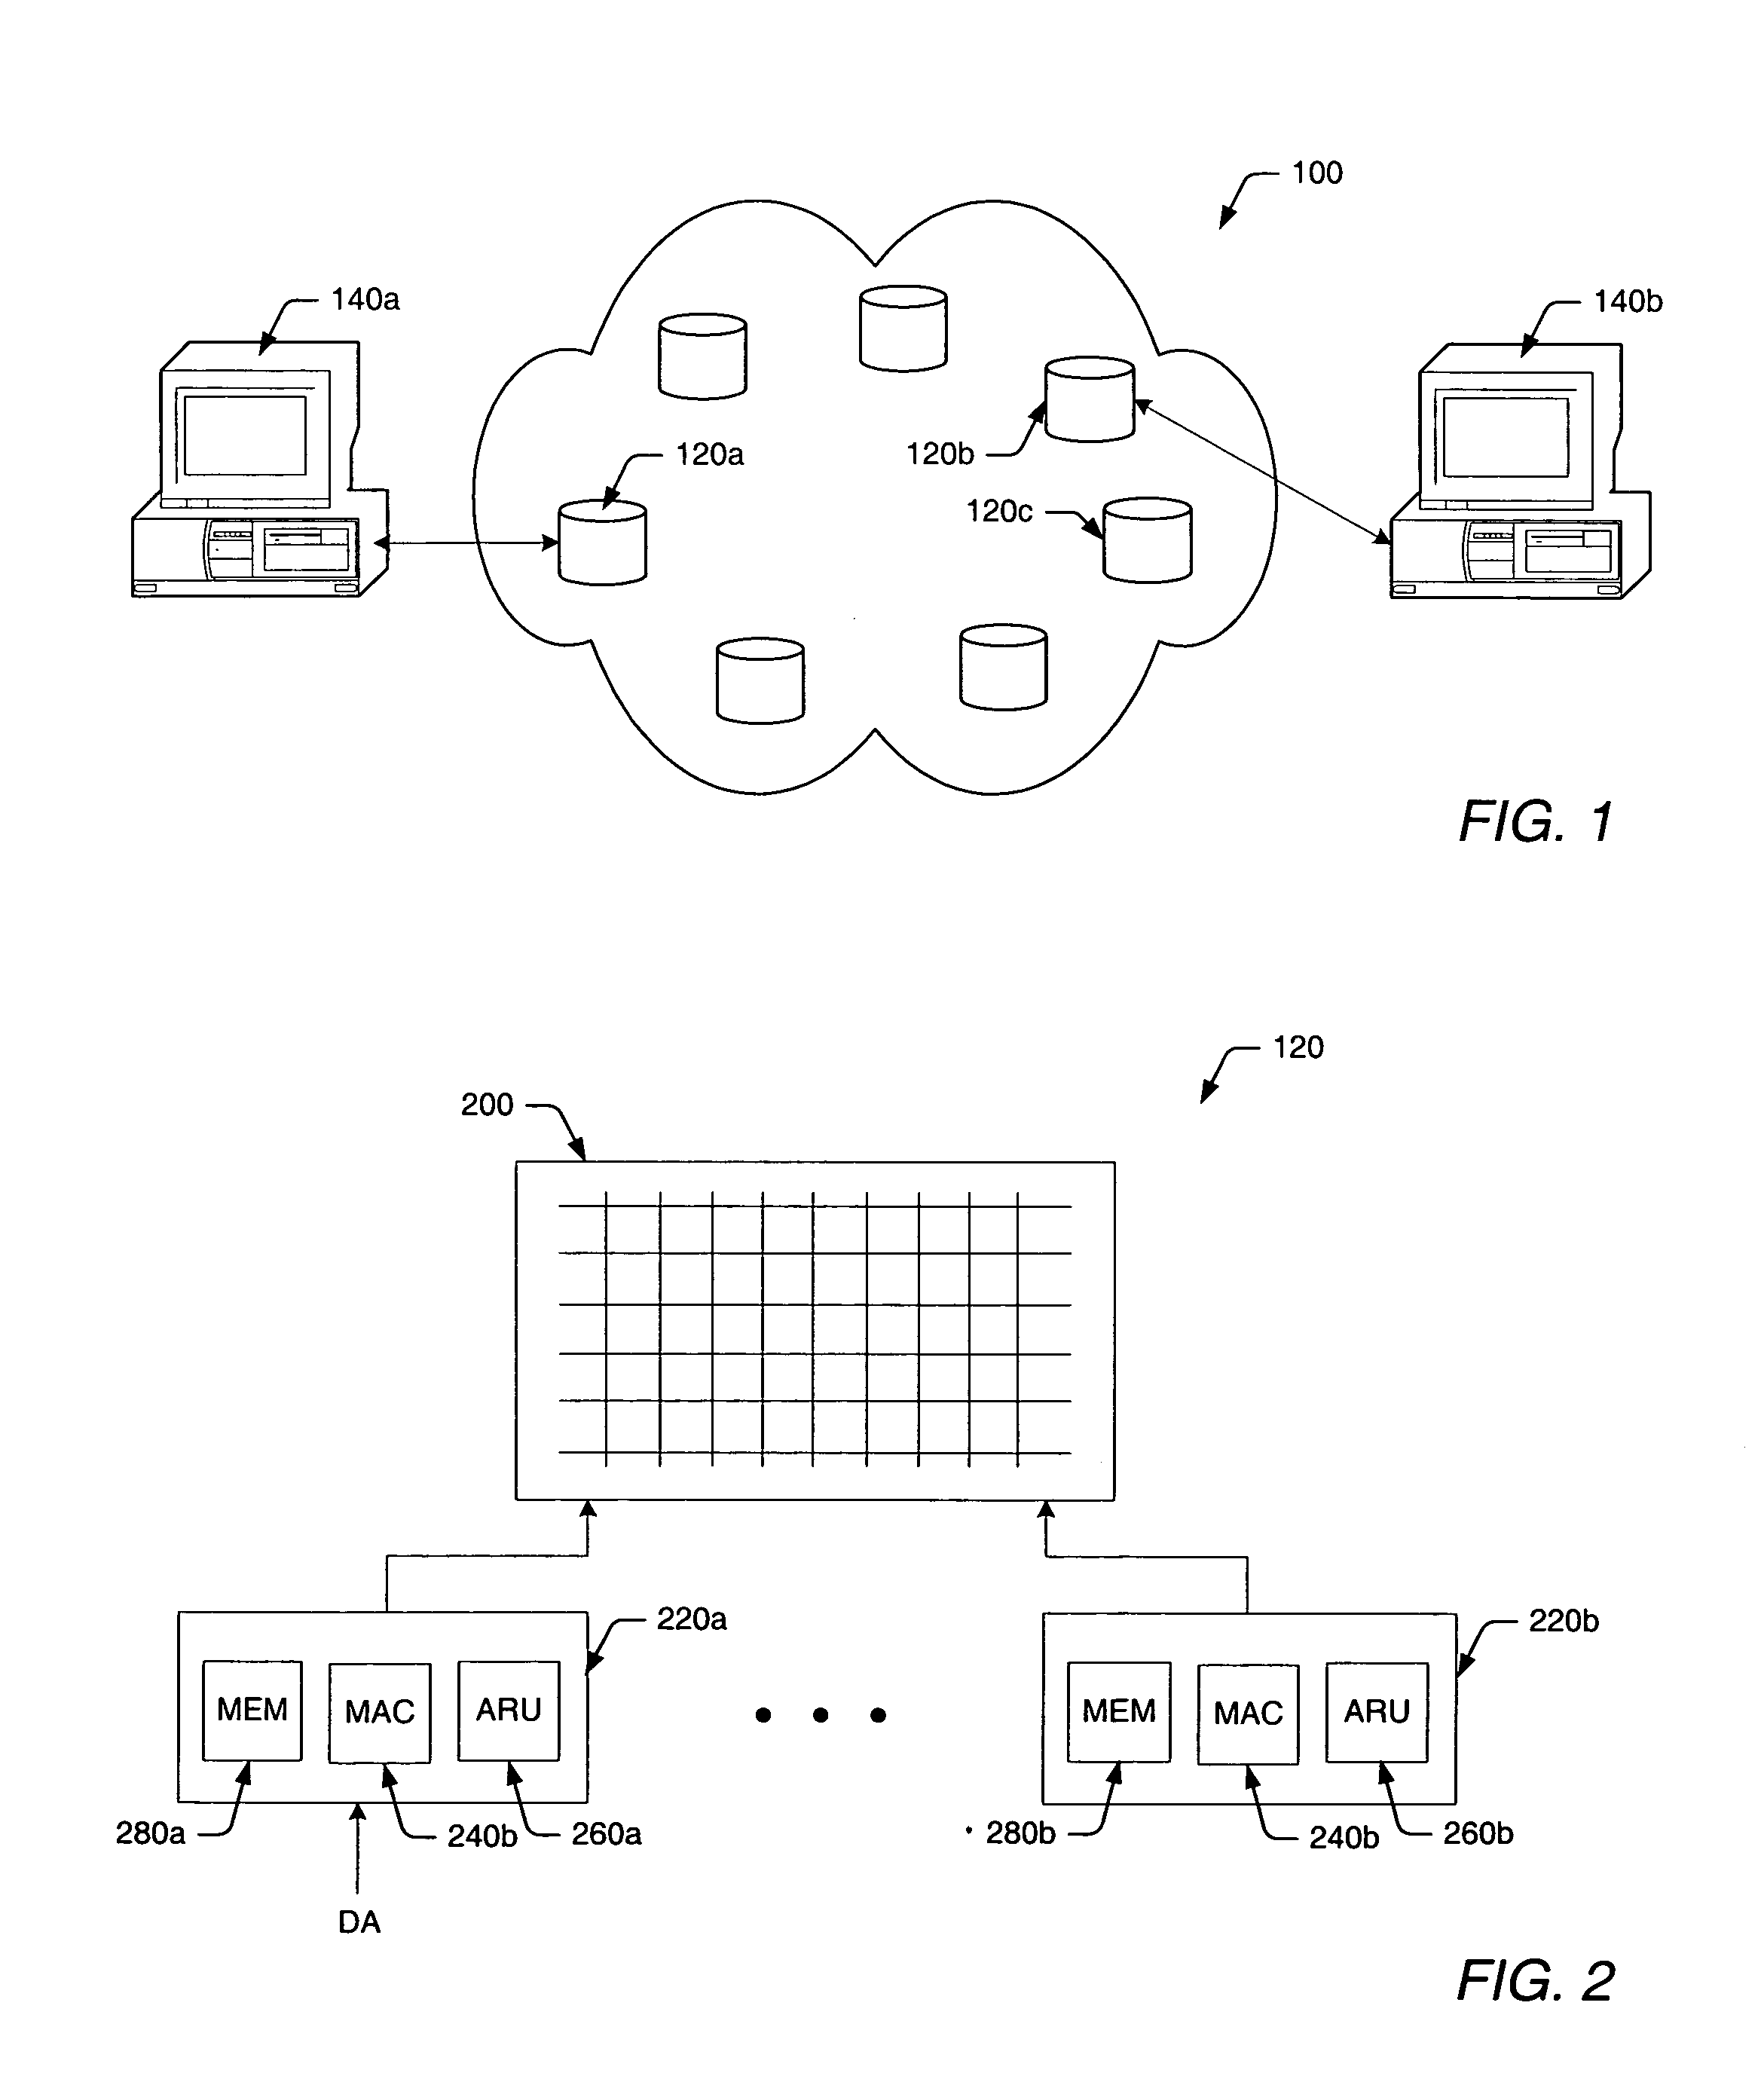 Circuit, apparatus, and method for extracting multiple matching entries from a content addressable memory (CAM) device